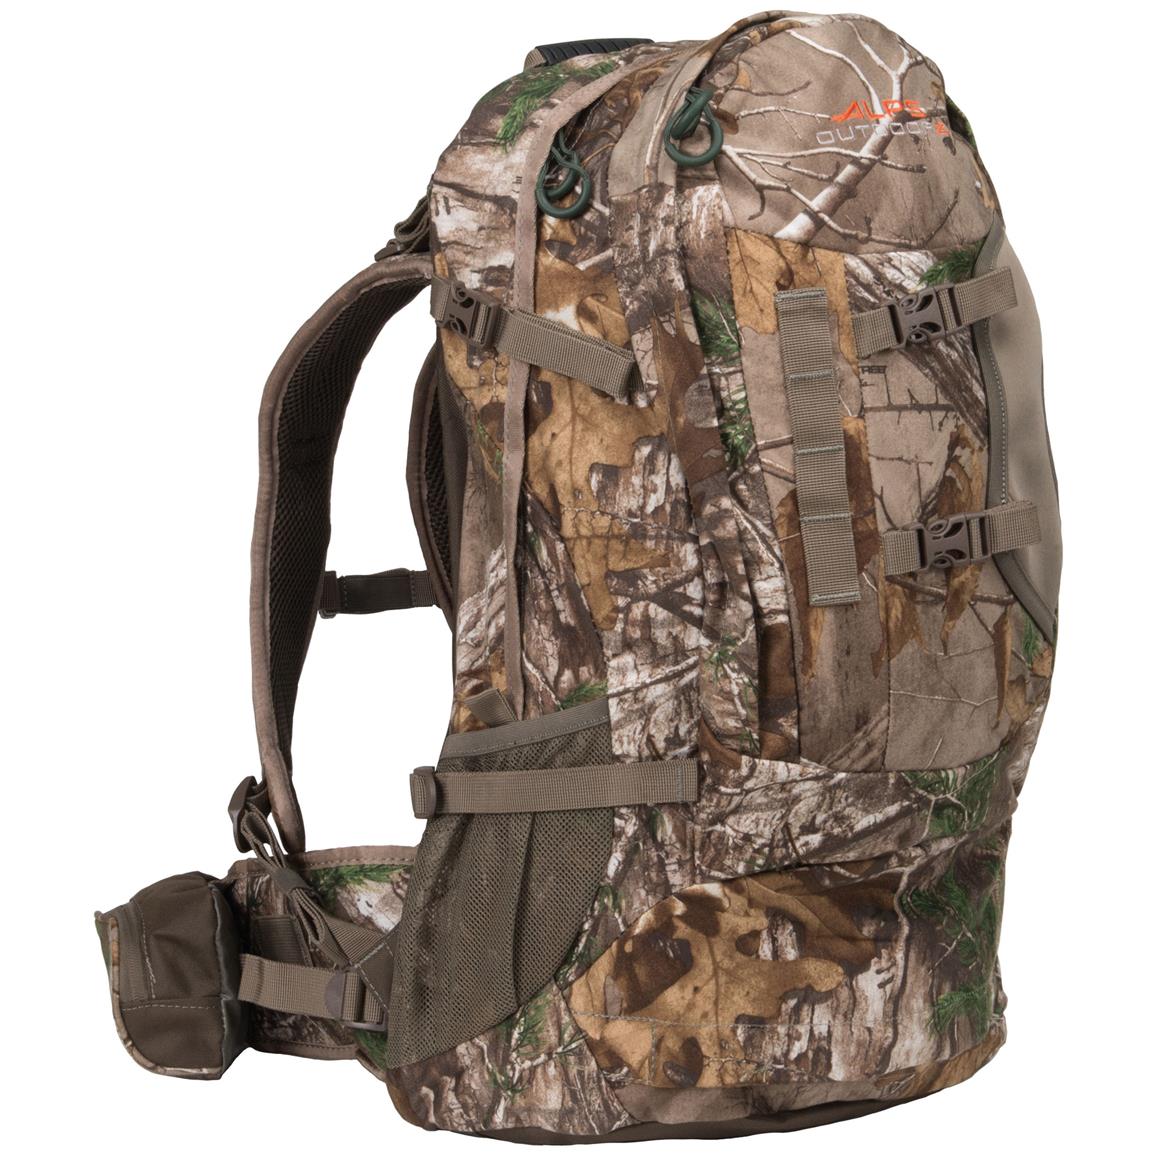 ALPS OutdoorZ Falcon Backpack - 670158, Hunting Backpacks at Sportsman ...